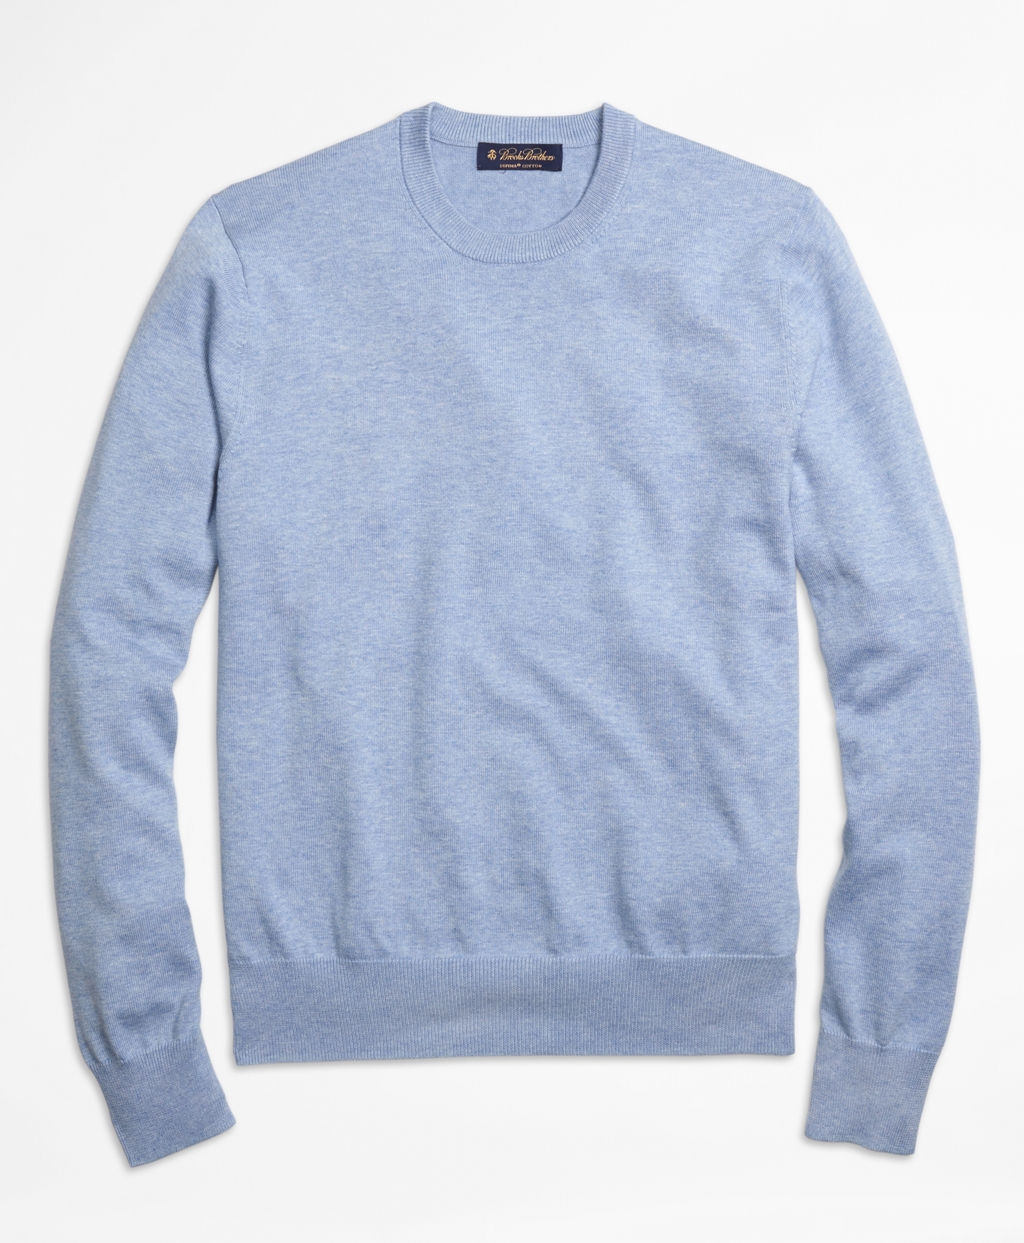 Lyst - Brooks brothers Supima® Cotton Crewneck Sweater in Blue for Men